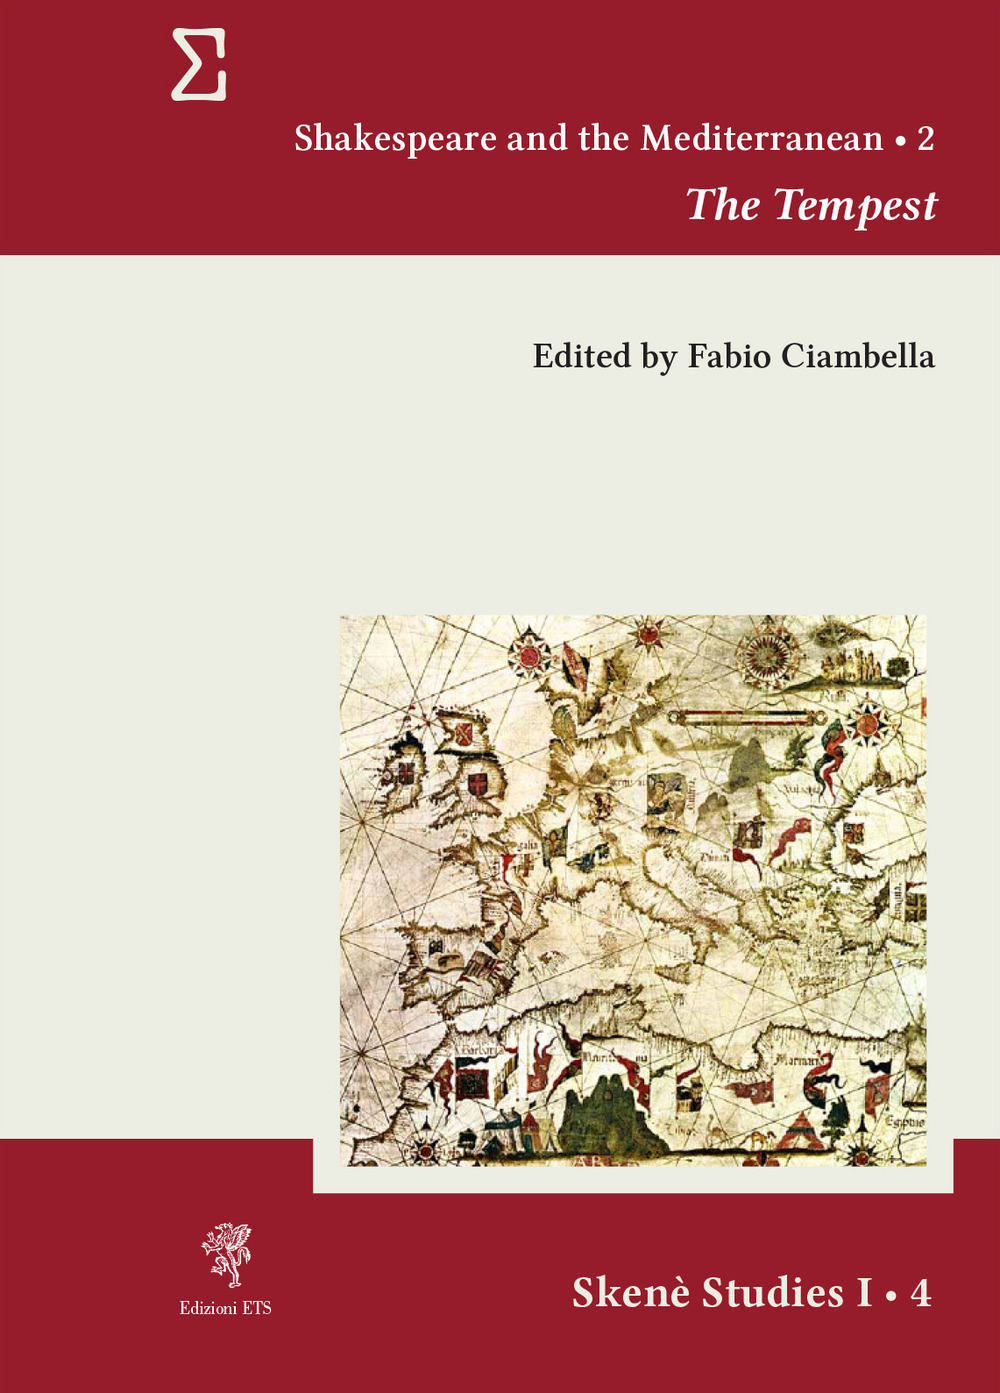 Shakespeare and the Mediterranean. Vol. 2: The tempest